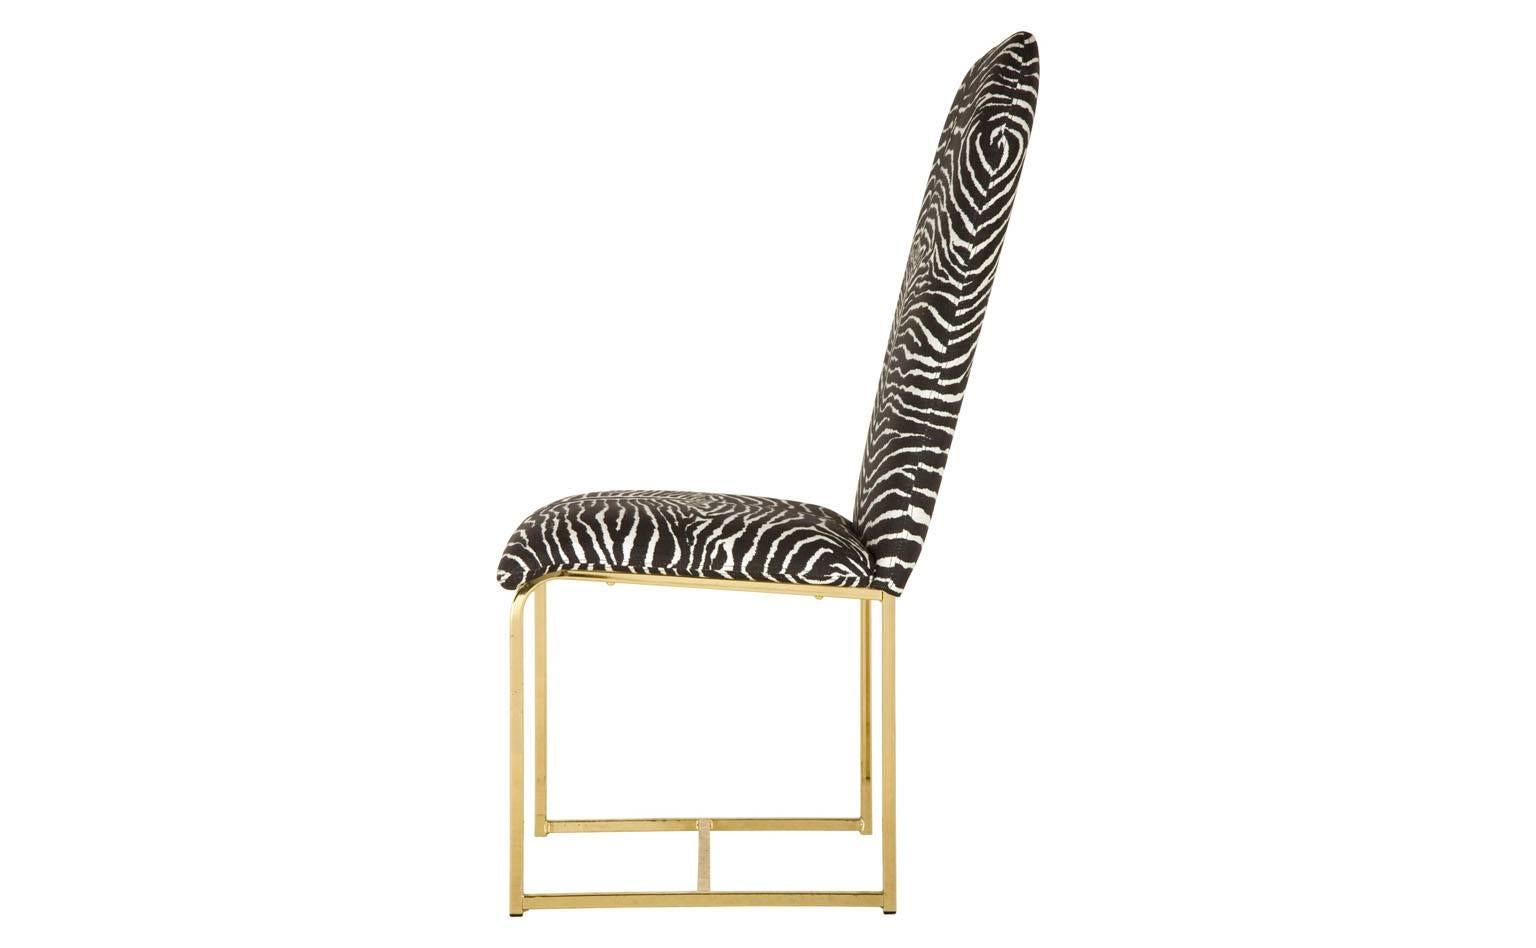 Reupholstered in Brunschwig & Fils black le zebre fabric
brass frame
mid-20th century
American
set of two available (priced individually)

Dimensions
18" W x 21" D x 36.5" H
seat height 19.5"H 
seat depth 18"D.